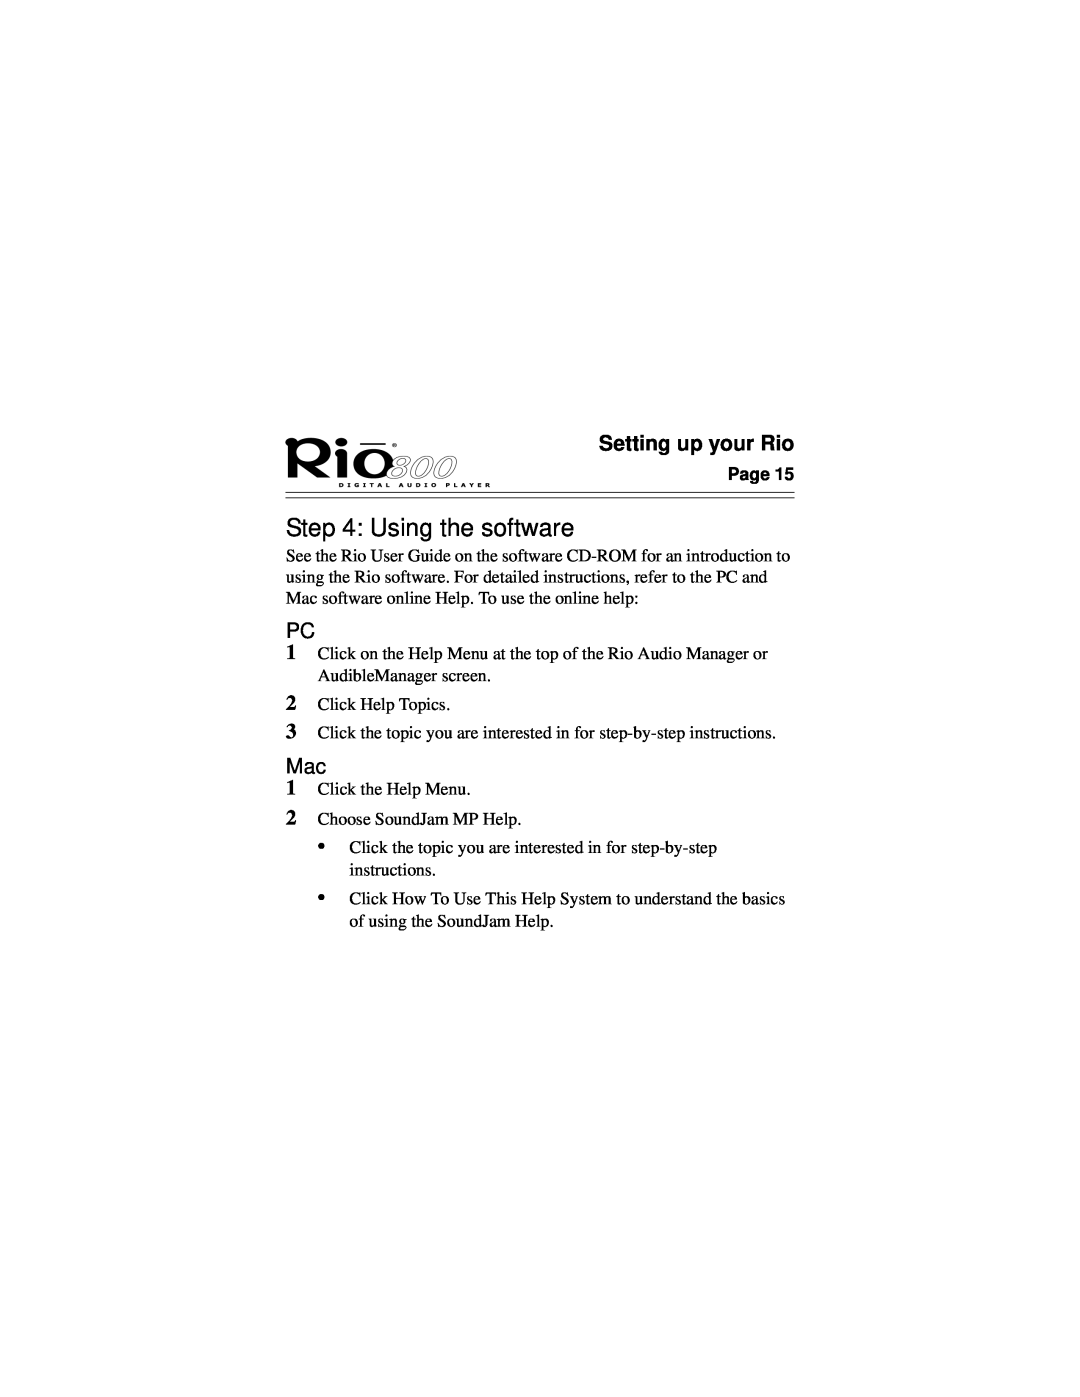 Rio Audio Rio 800 manual Using the software, Setting up your Rio 